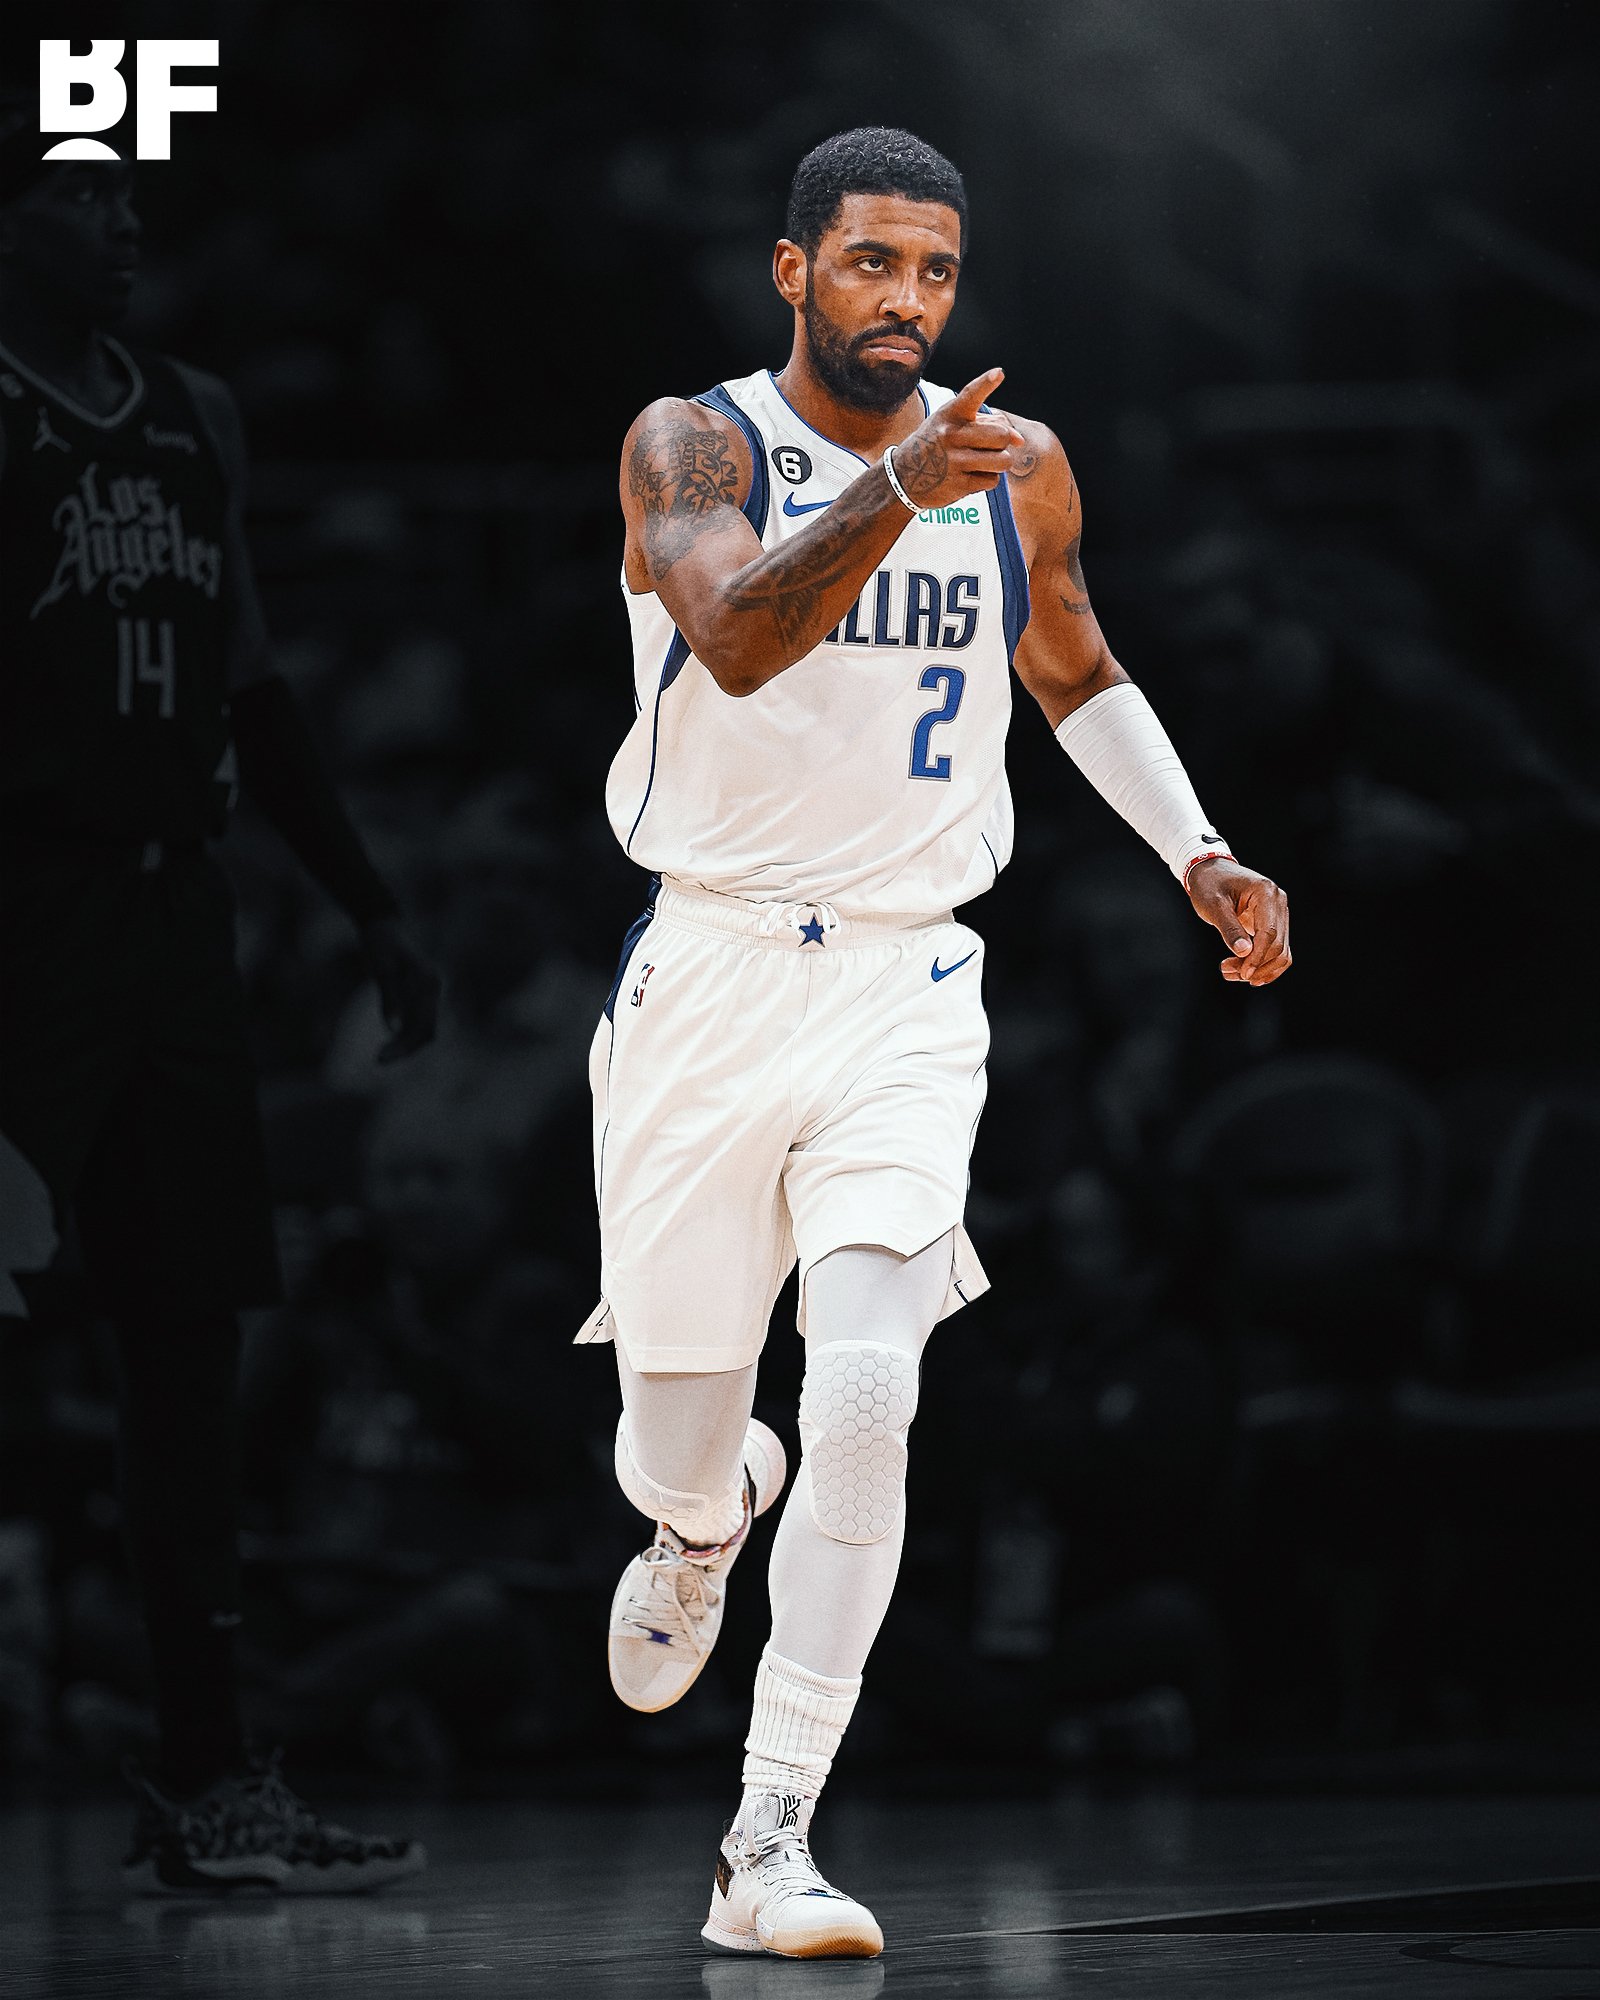 Basketball Forever Irving Puts Up 24 PTS, 5 AST & 4 THREES In His Mavericks DEBUT As Dallas Gets The 110 104 WIN Vs The L.A. Clippers!